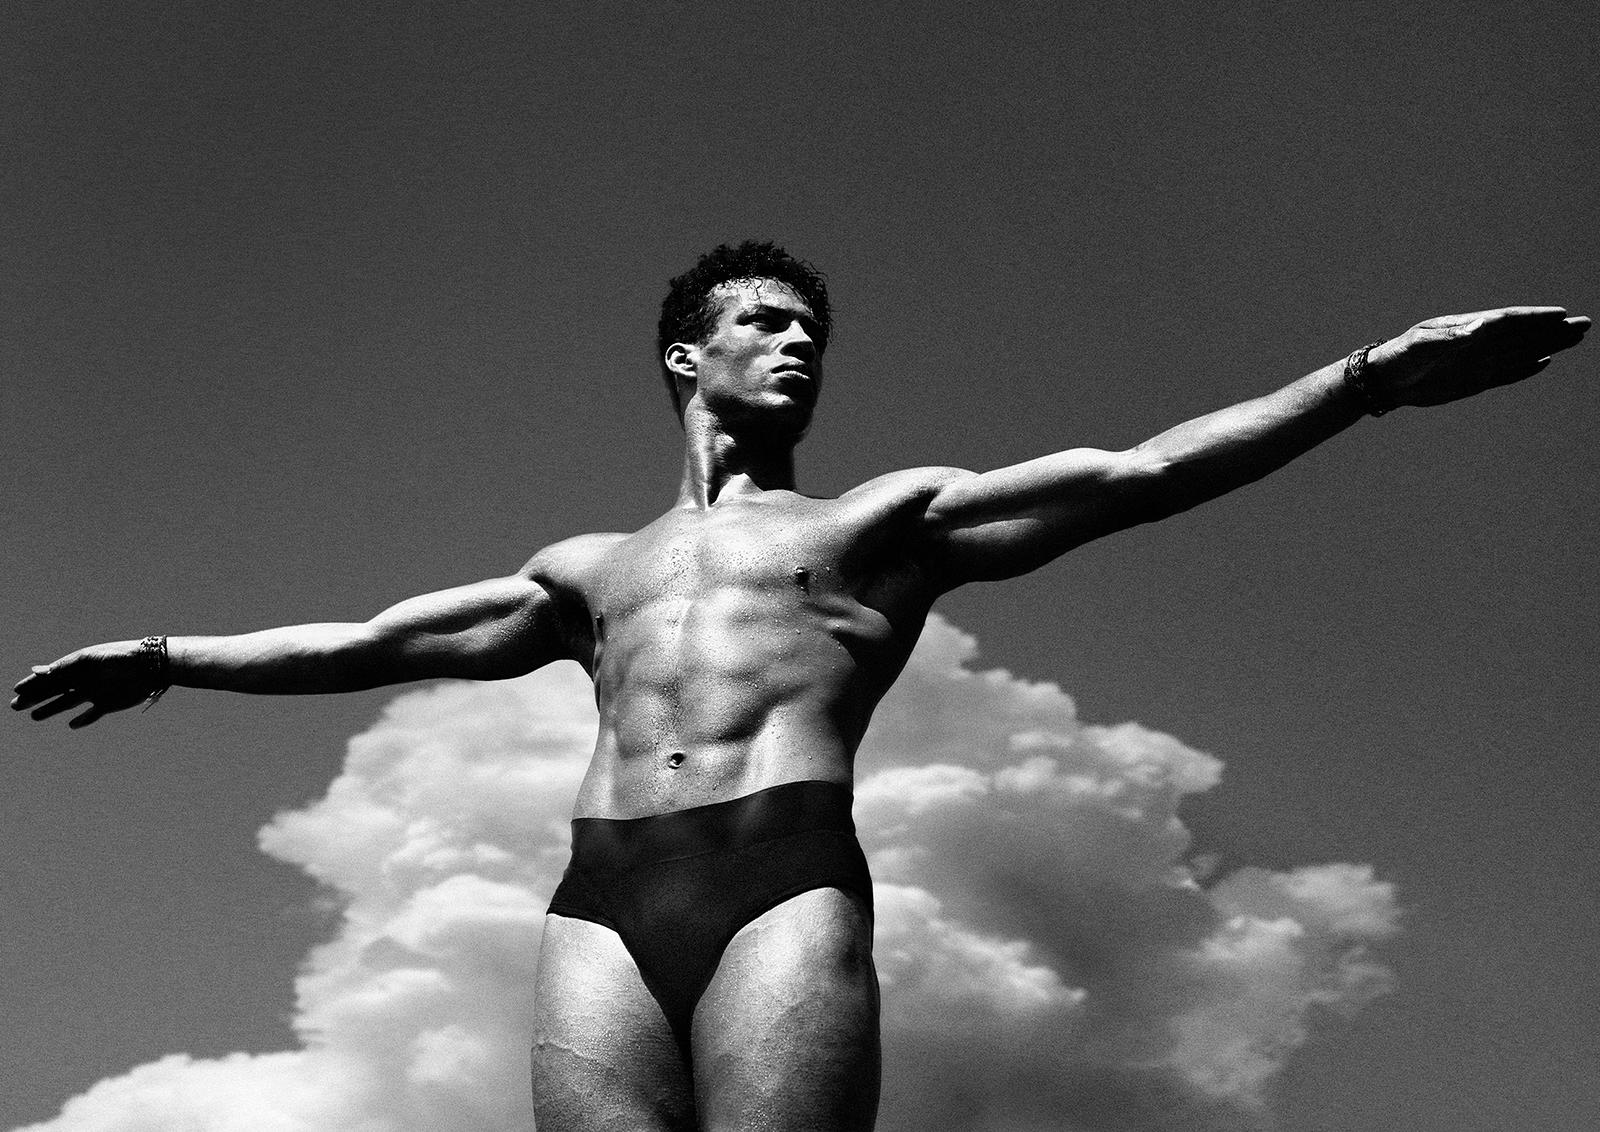 Mathew- Signed limited edition print, Black white, Man underwear, Homoerotic - Contemporary Photograph by Ian Sanderson